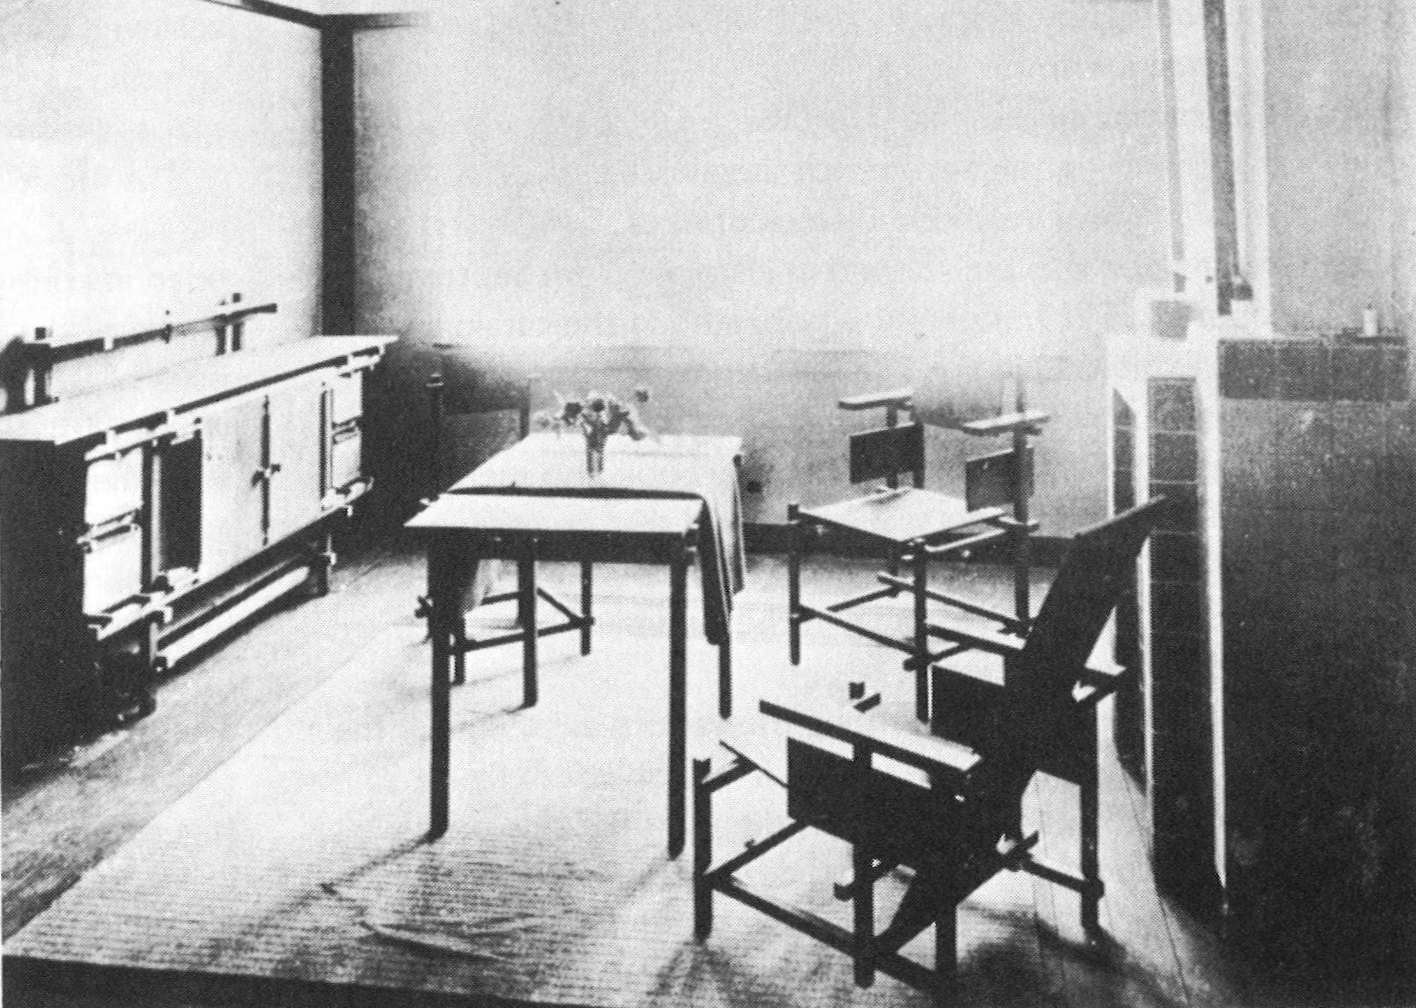 Rietveld, set of furniture for model apartment, Spangen, Rotterdam, 1920. Reproduced in De Stijl: The Formative Years catalogue